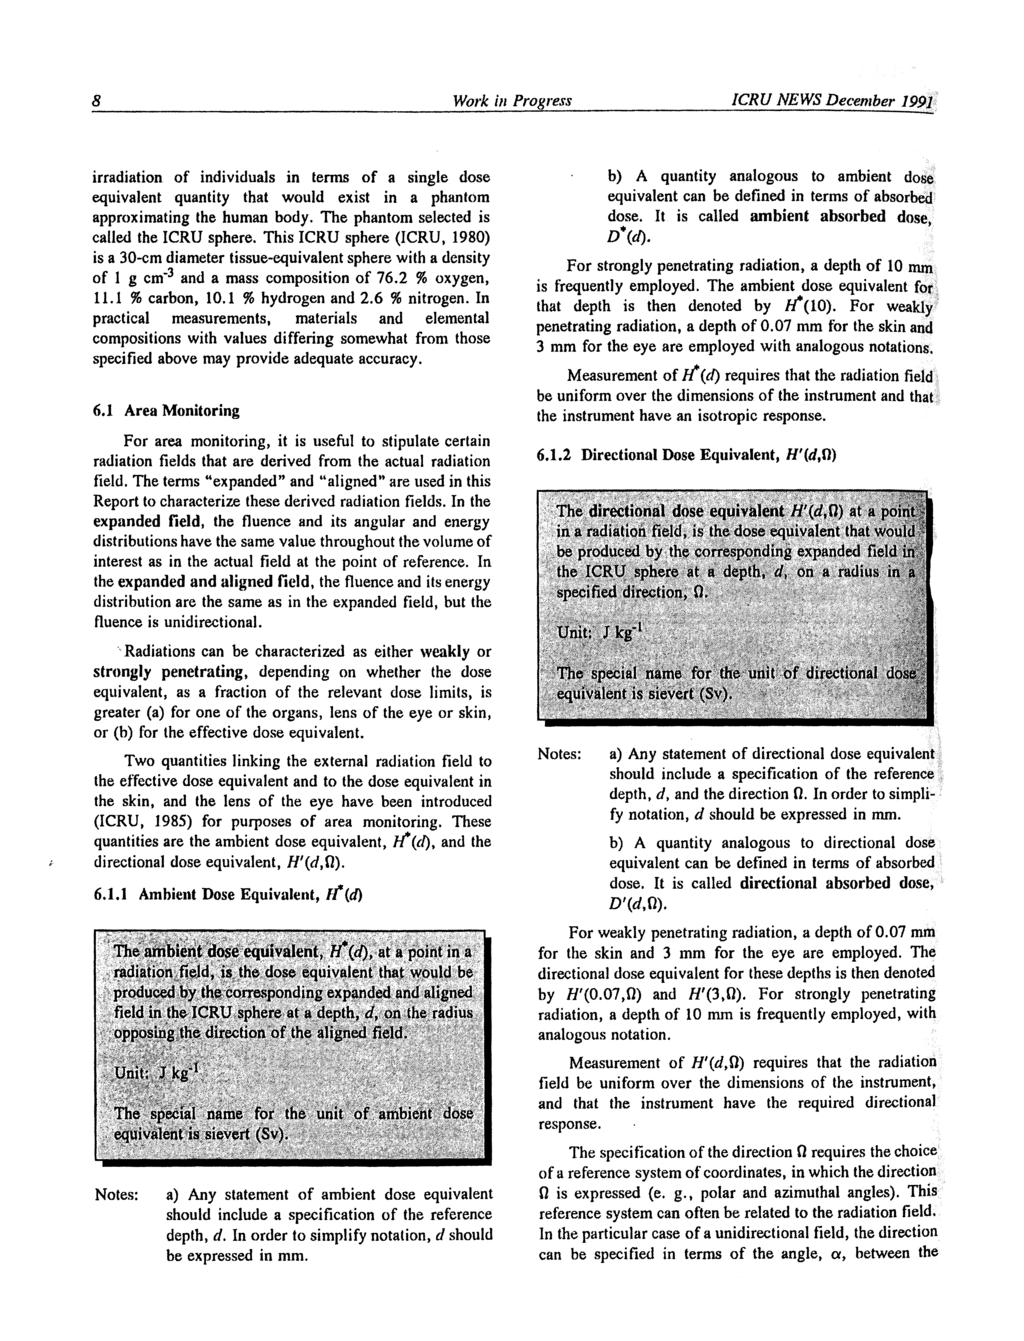 8 Work in Progress ICRU NEWS December 1991 irradiation of individuals in terms of a single dose equivalent quantity that would exist in a phantom approximating the human body.